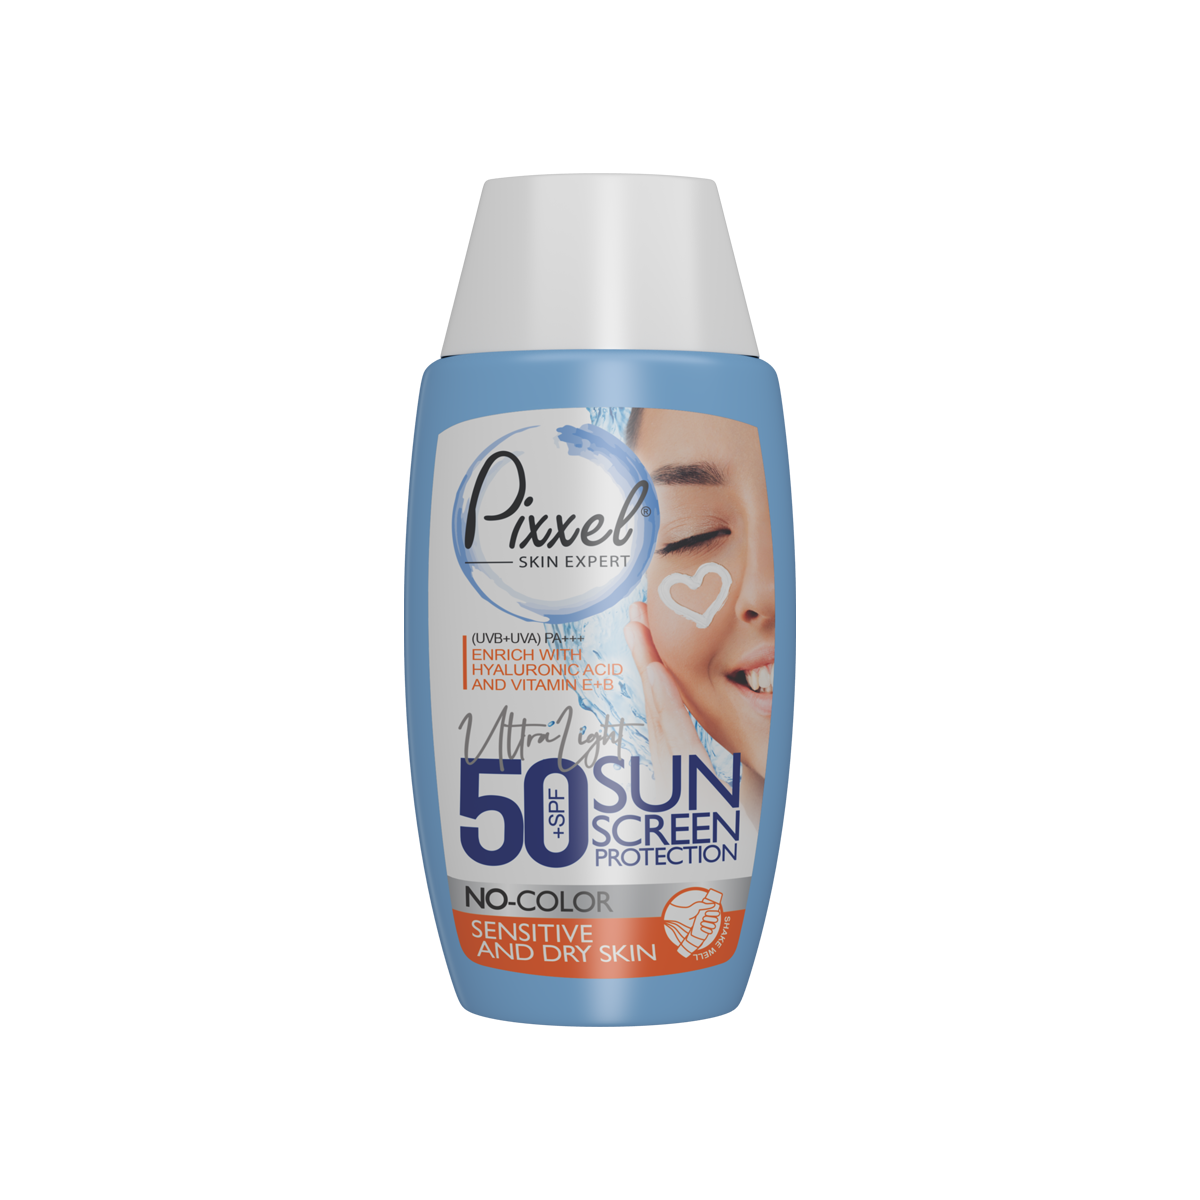 Pixxel No Color Sunscreen Protection For Dry Skin